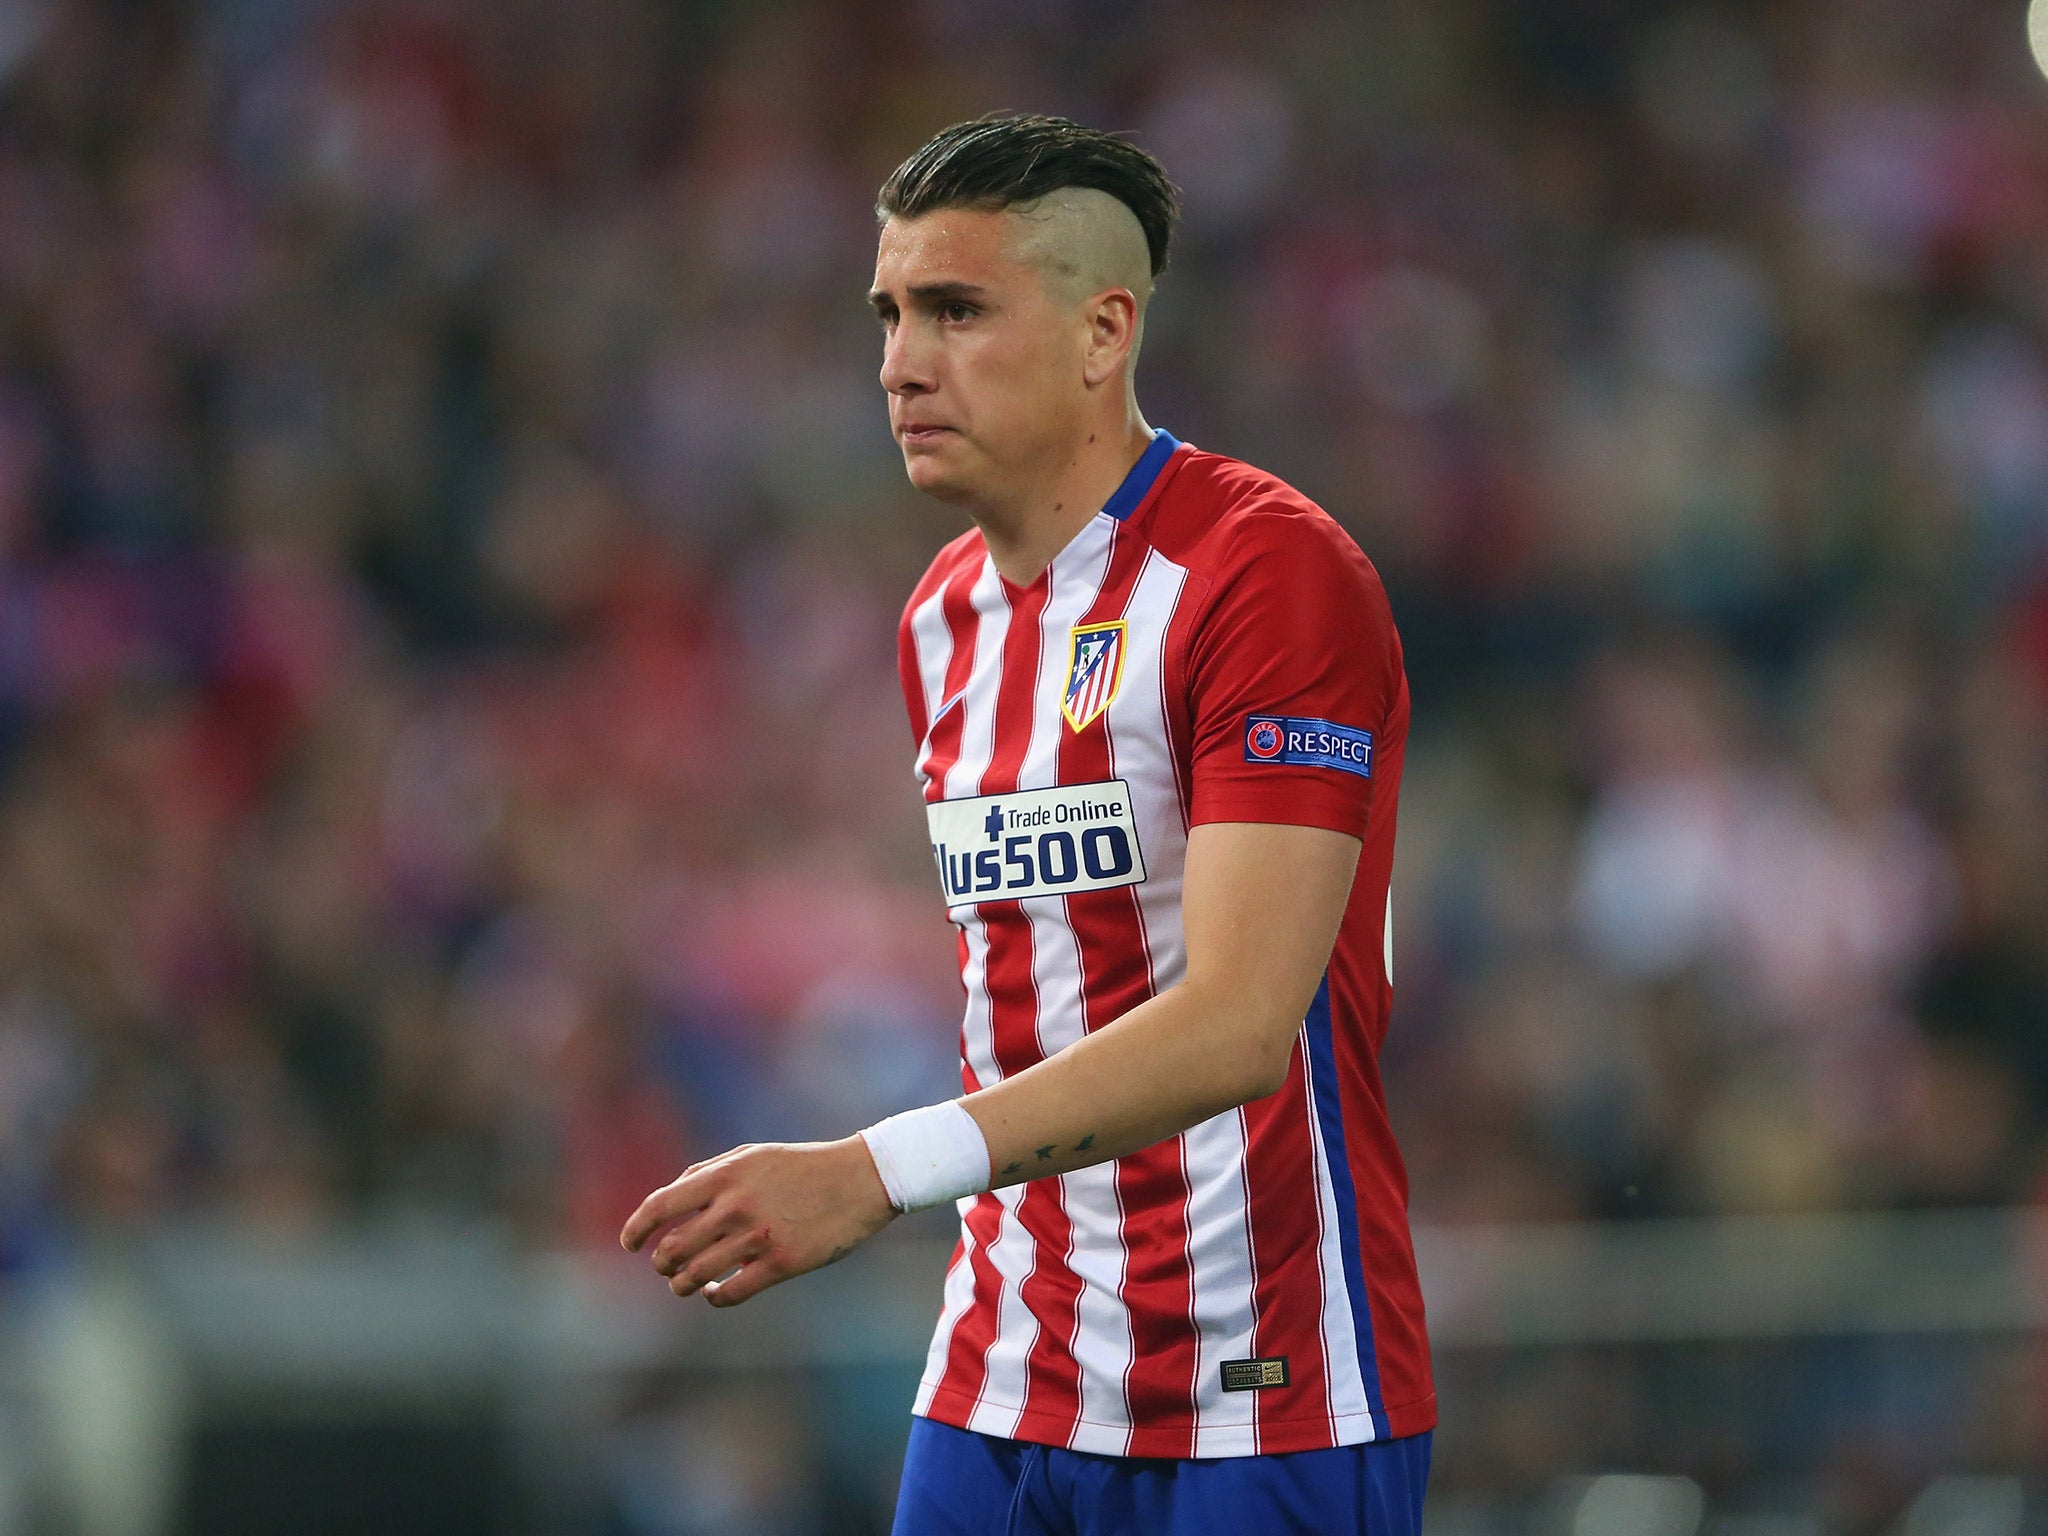 Atletico Madrid's Jose Gimenez is a reported transfer target for Arsenal